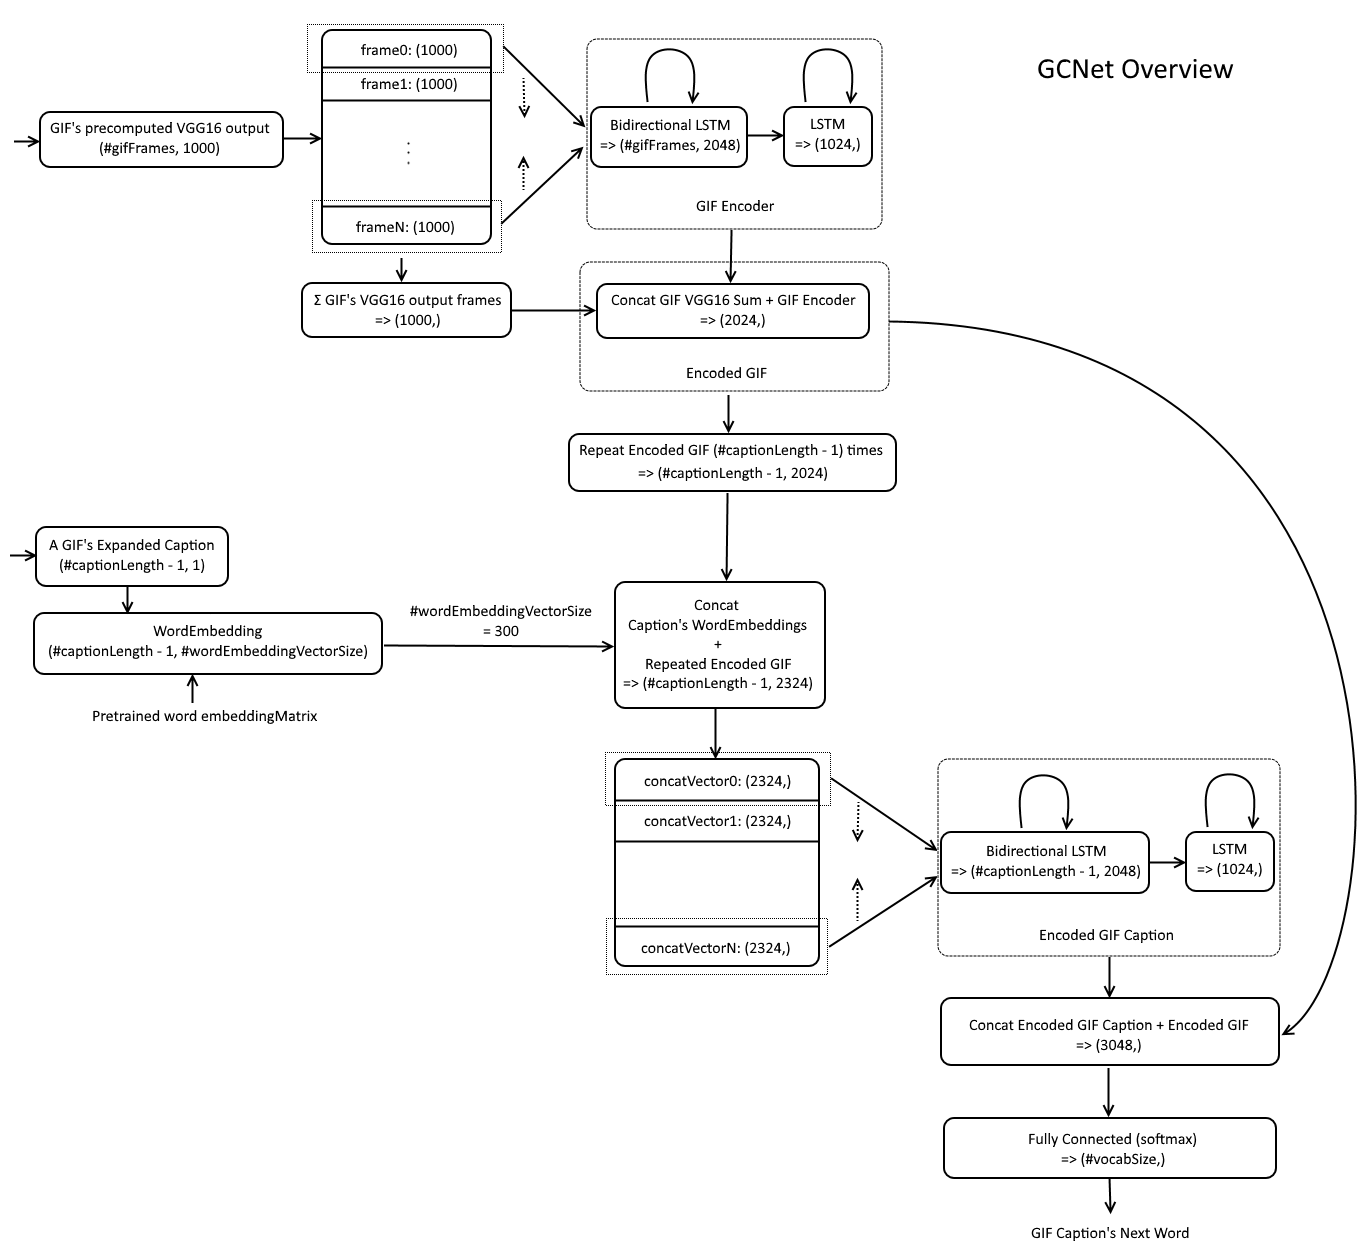 GCNet Architecture Overview